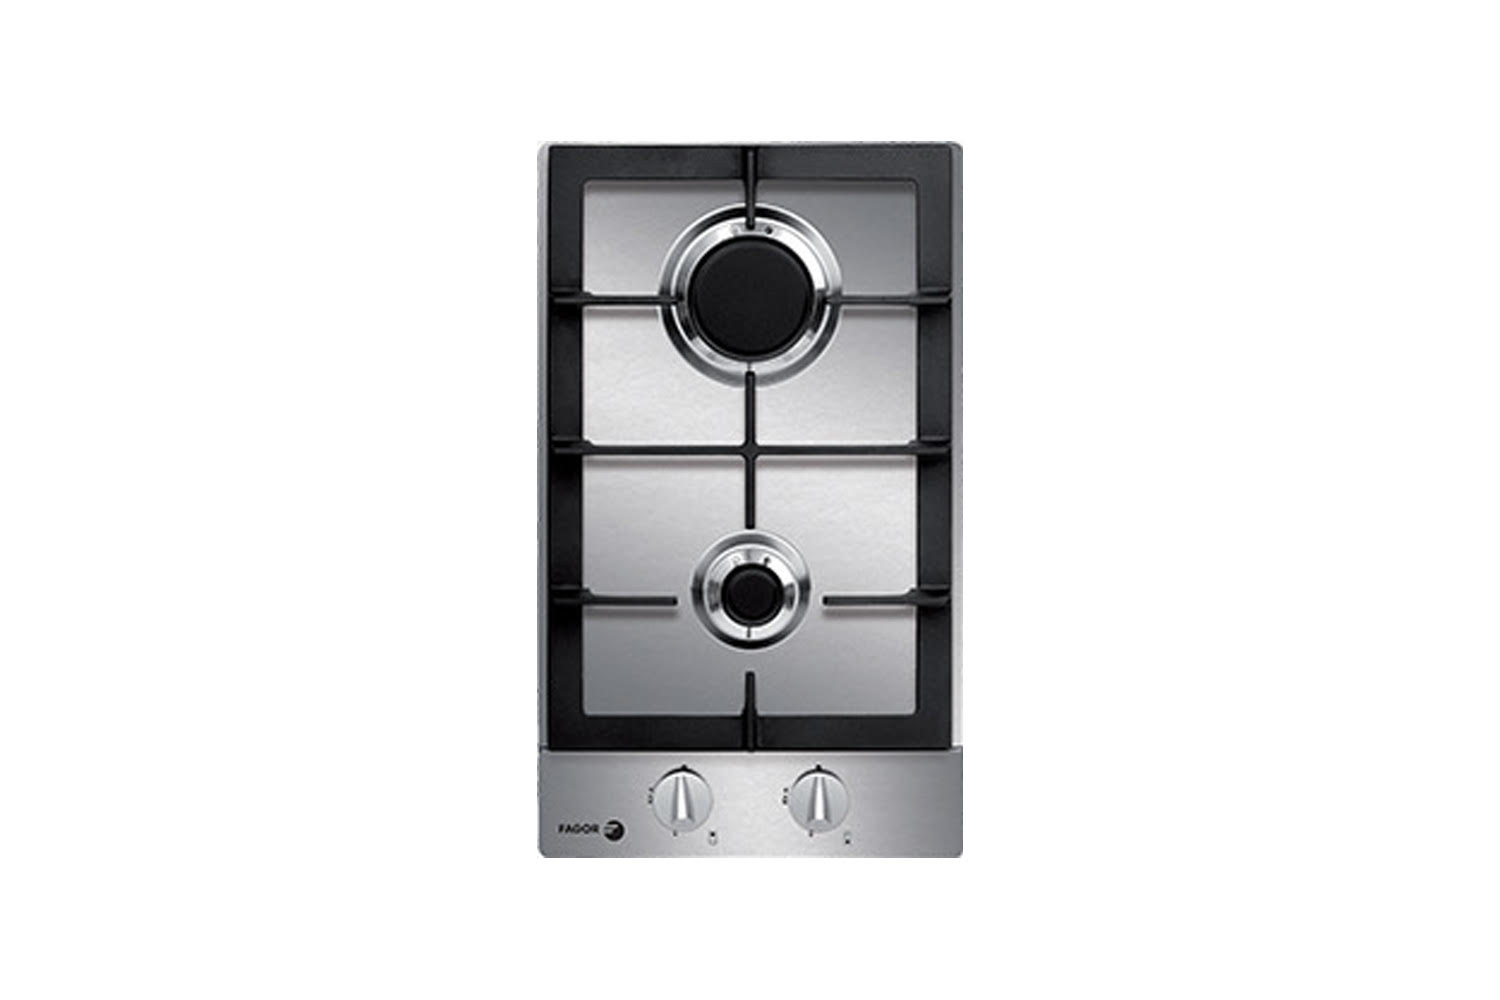 a more affordable option is the fagor modular gas cooktop with \2 sealed burner 16